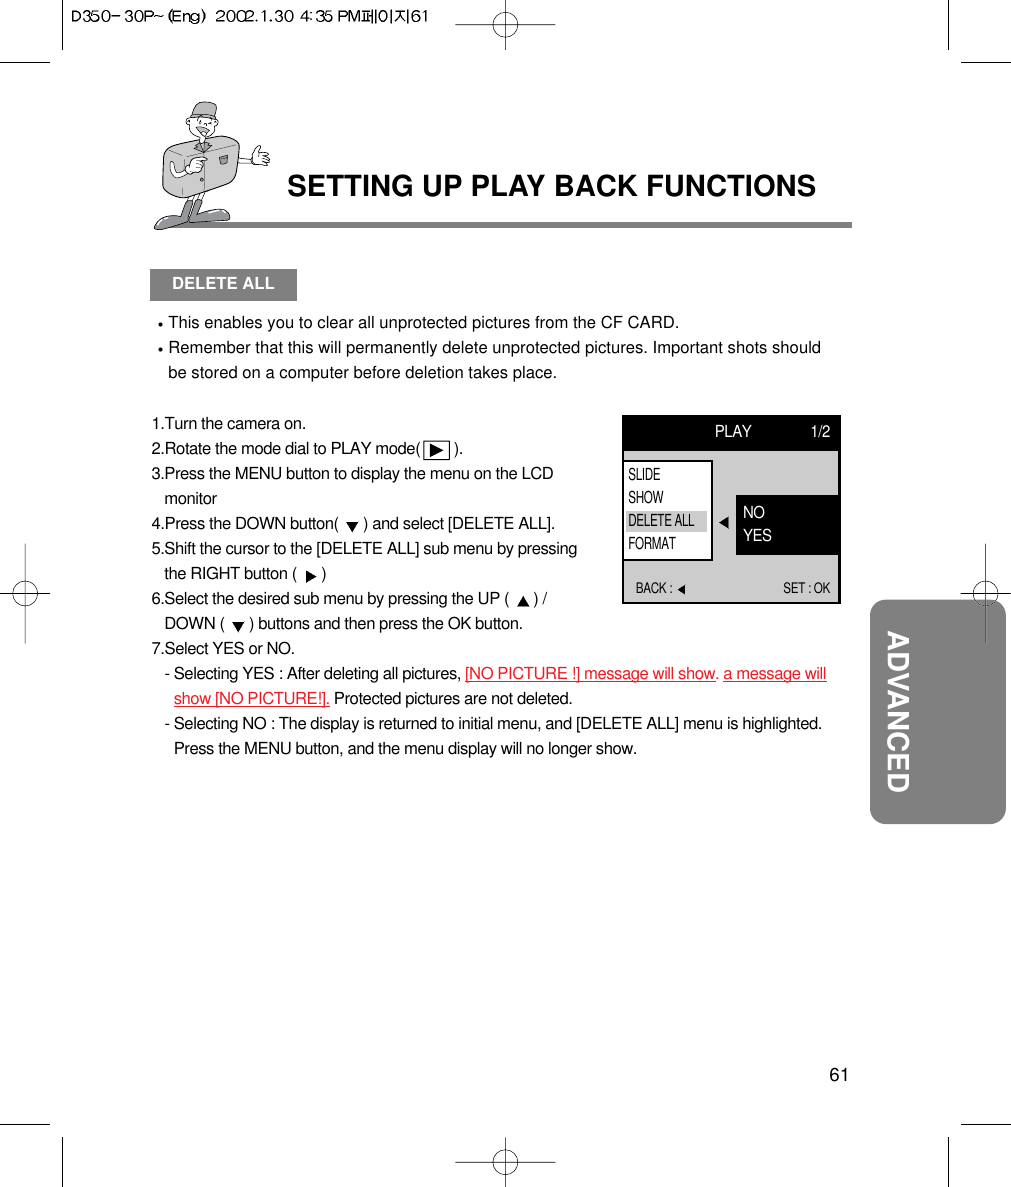 61ADVANCEDSETTING UP PLAY BACK FUNCTIONSDELETE ALLThis enables you to clear all unprotected pictures from the CF CARD.Remember that this will permanently delete unprotected pictures. Important shots shouldbe stored on a computer before deletion takes place.1.Turn the camera on.2.Rotate the mode dial to PLAY mode(        ).3.Press the MENU button to display the menu on the LCDmonitor4.Press the DOWN button(  ) and select [DELETE ALL].5.Shift the cursor to the [DELETE ALL] sub menu by pressingthe RIGHT button (  ) 6.Select the desired sub menu by pressing the UP (  ) /DOWN (  ) buttons and then press the OK button.7.Select YES or NO.- Selecting YES : After deleting all pictures, [NO PICTURE !] message will show. a message willshow [NO PICTURE!]. Protected pictures are not deleted.- Selecting NO : The display is returned to initial menu, and [DELETE ALL] menu is highlighted.Press the MENU button, and the menu display will no longer show.PLAY 1/2BACK :  SET : OKNOYESSLIDESHOWDELETE ALLFORMAT